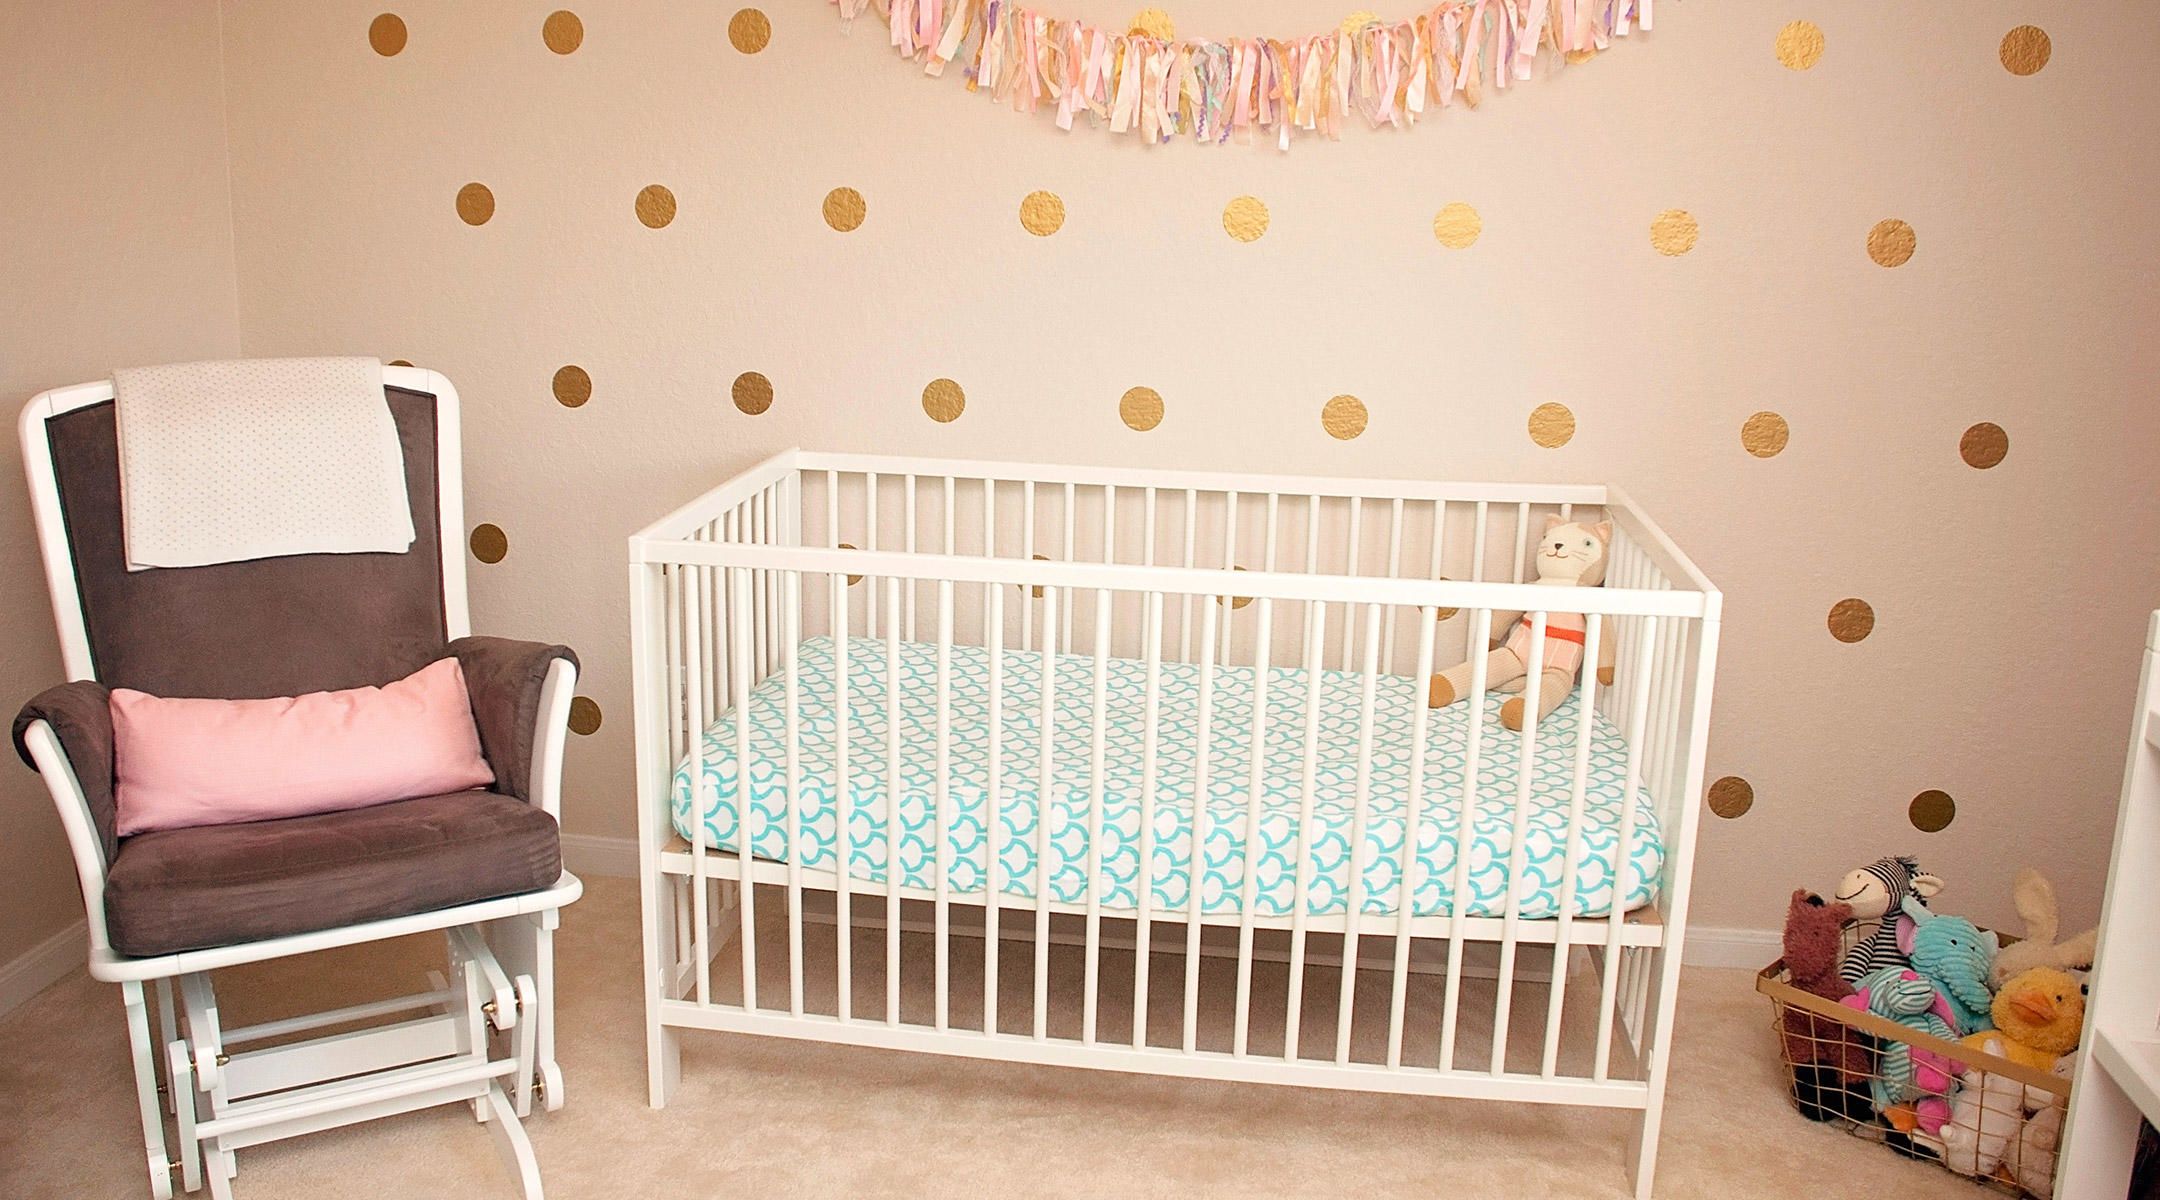 Nursery Ideas – The Best and Most Unique